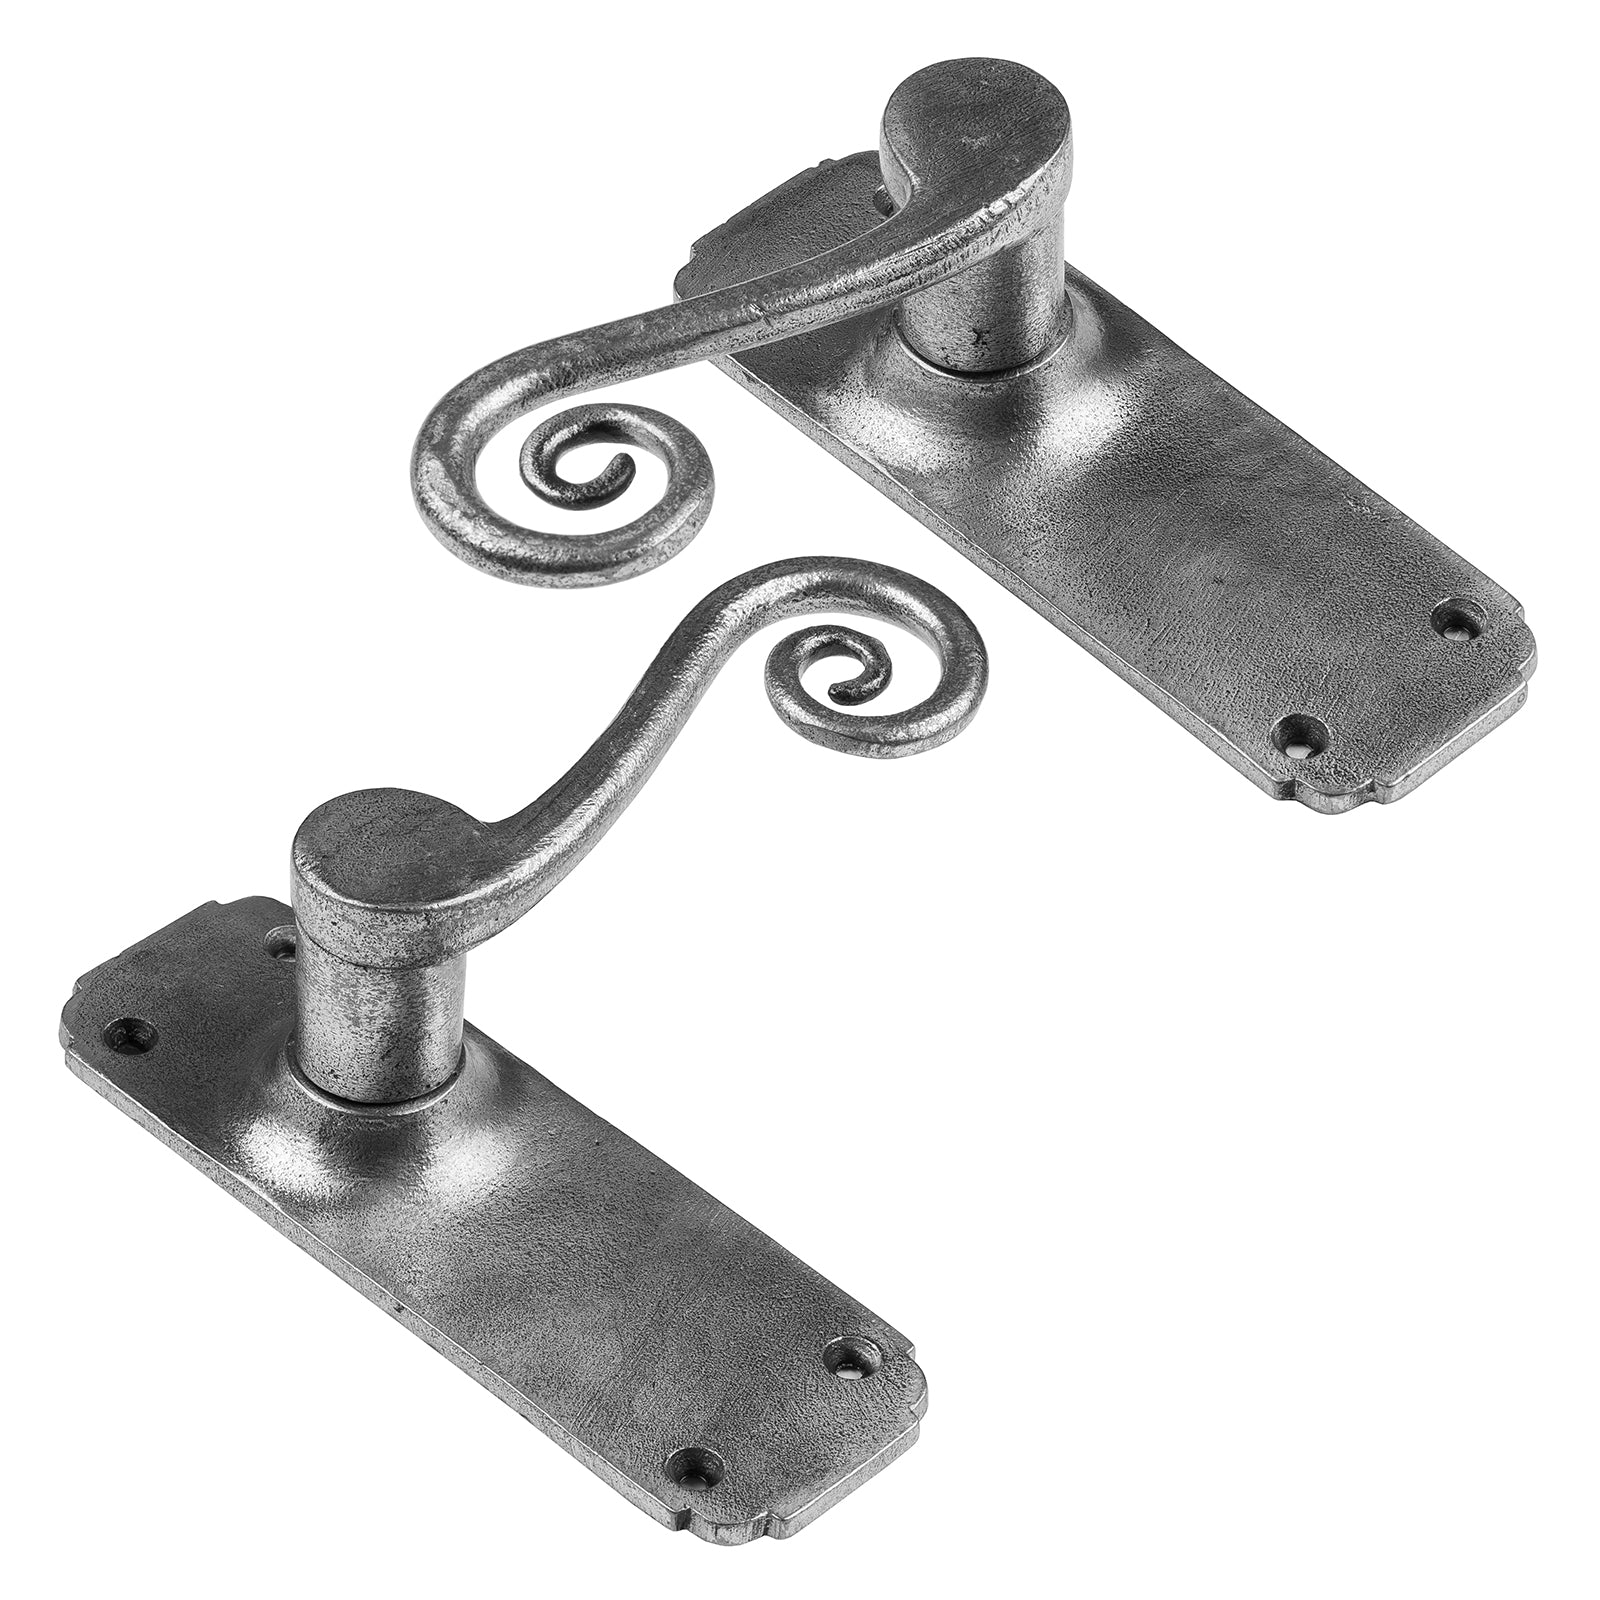 Monkey Tail pewter latch door handle SHOW